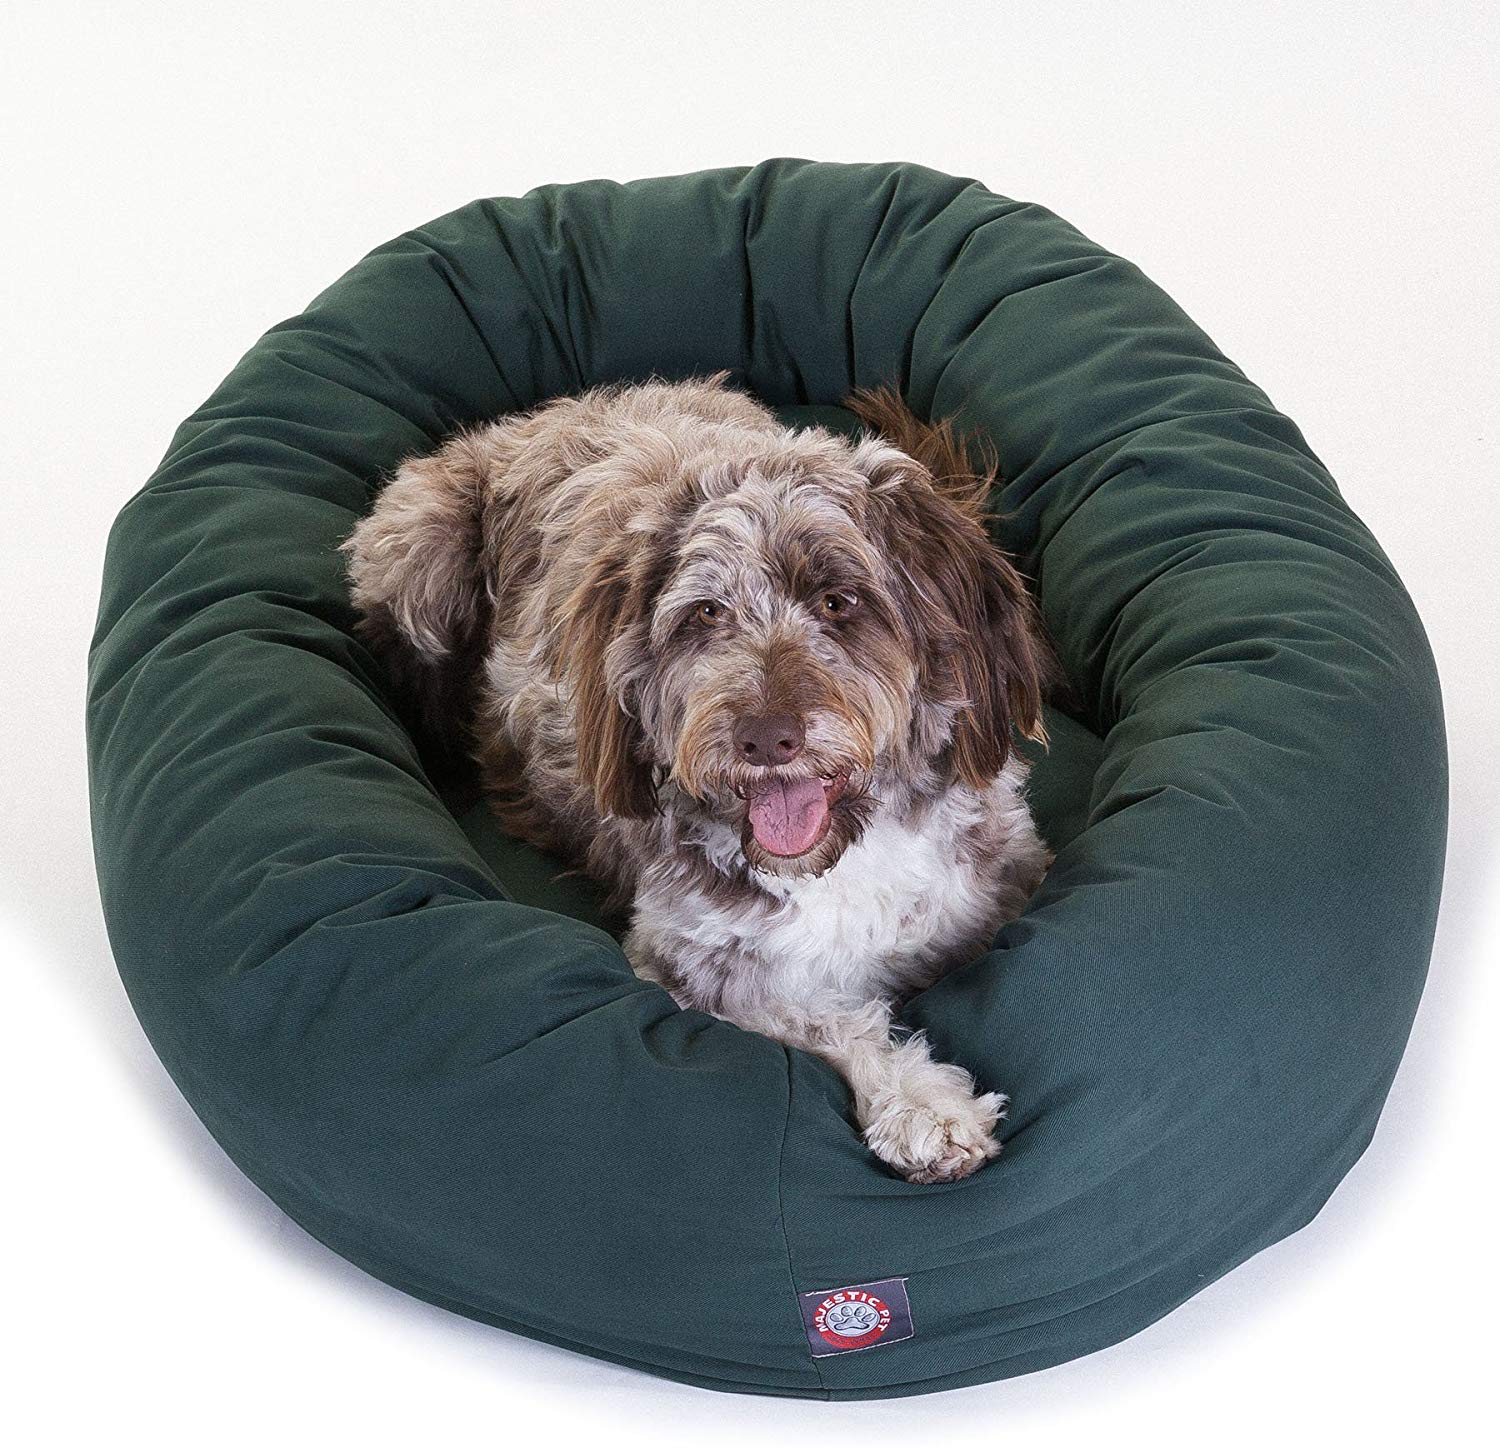 How To Choose The Best Dog Bed For Hygen Hound